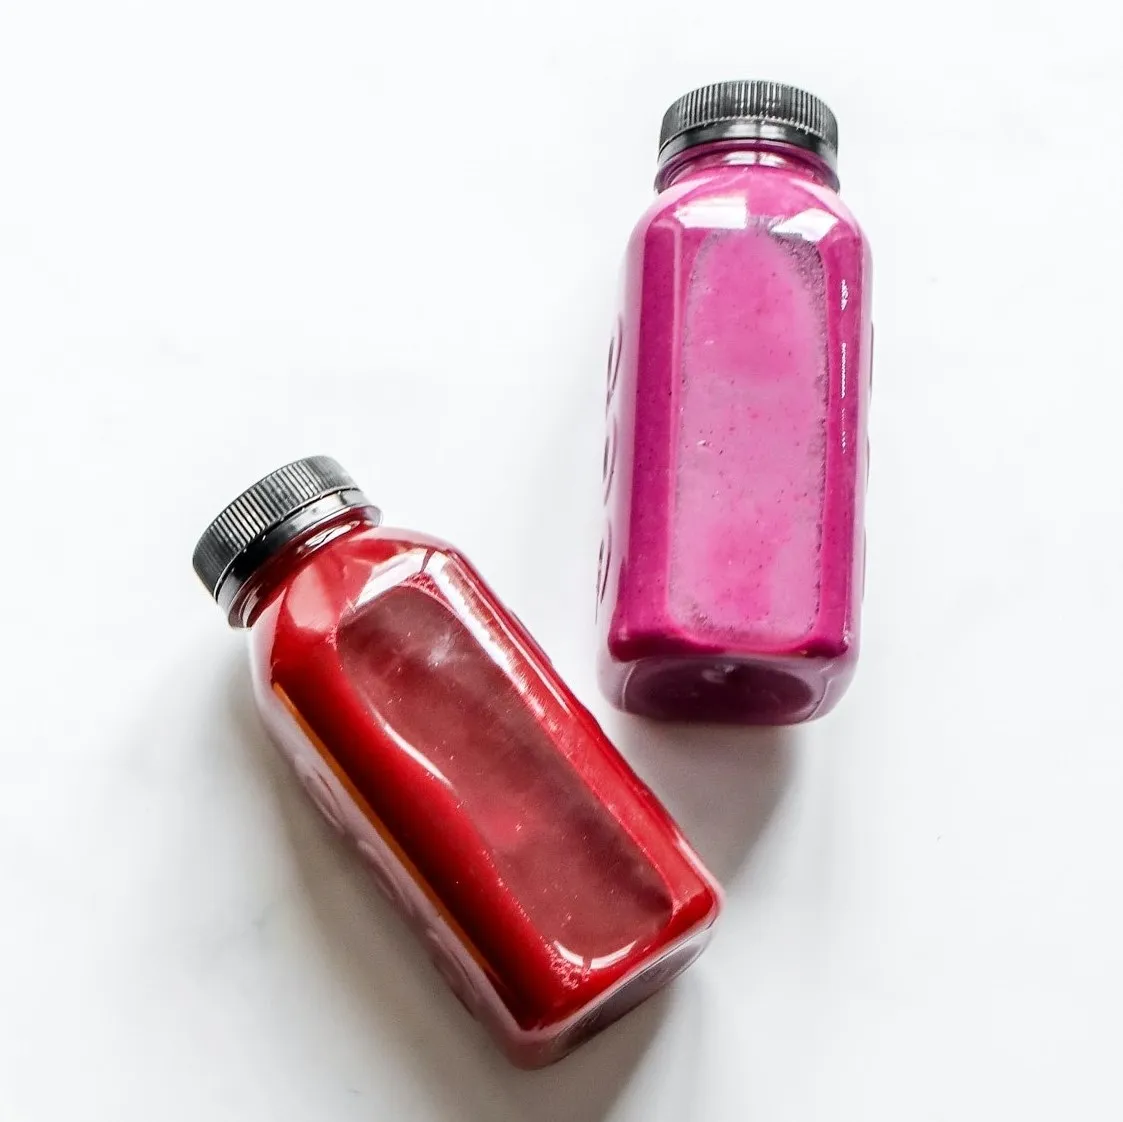 Two bottles filled with pink content on white surface